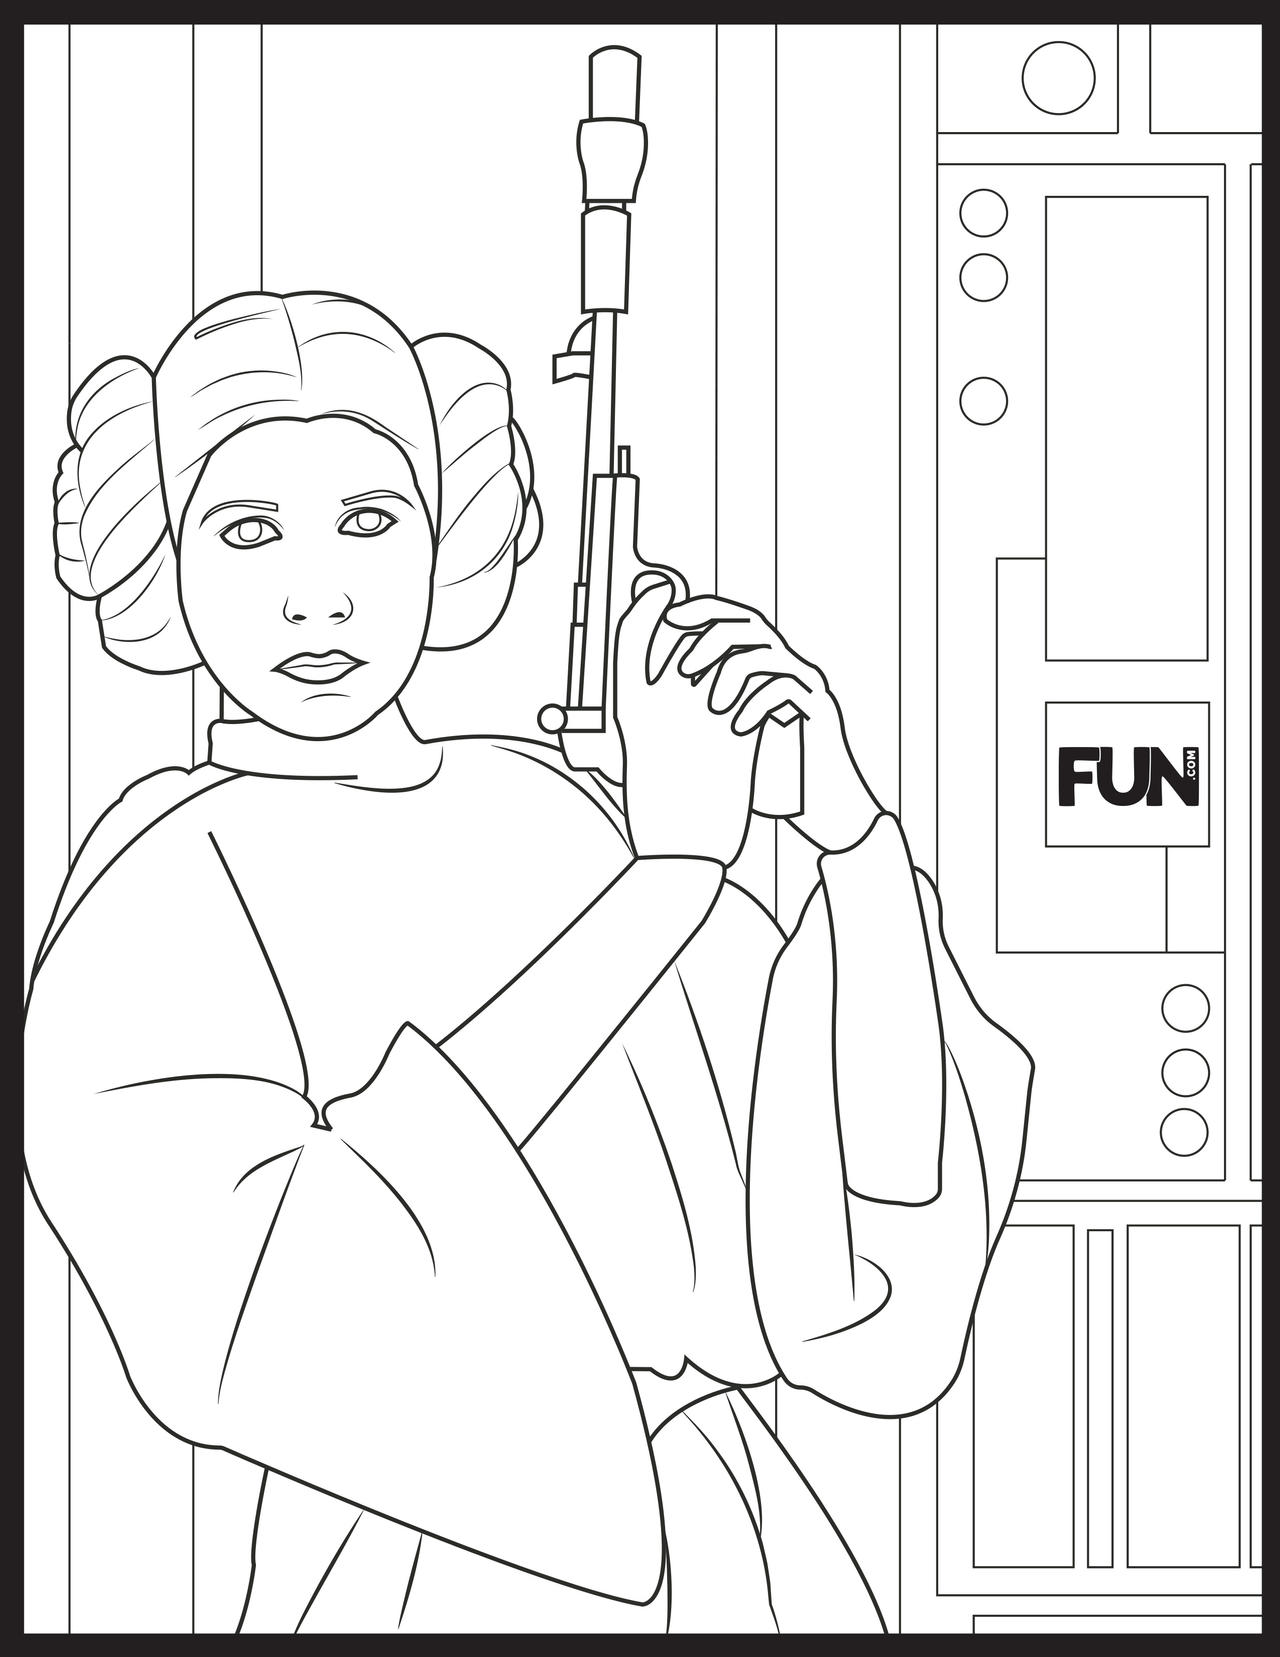 Star wars coloring pages by coloringpageswk on